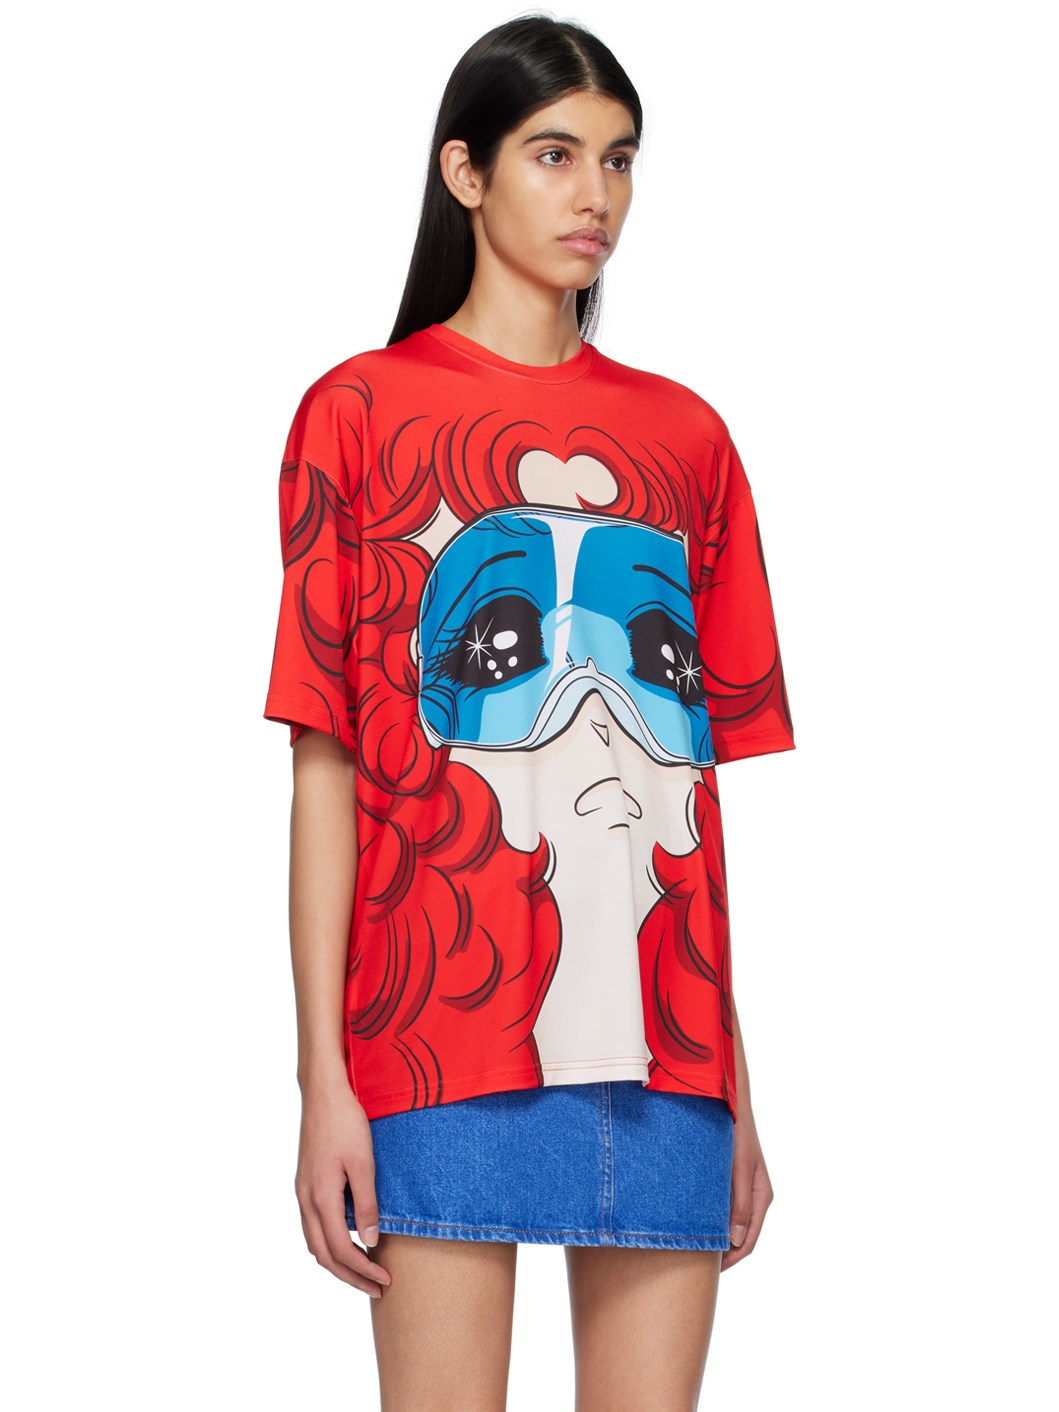 SSENSE Exclusive Red Goggle Girl T-Shirt - 2